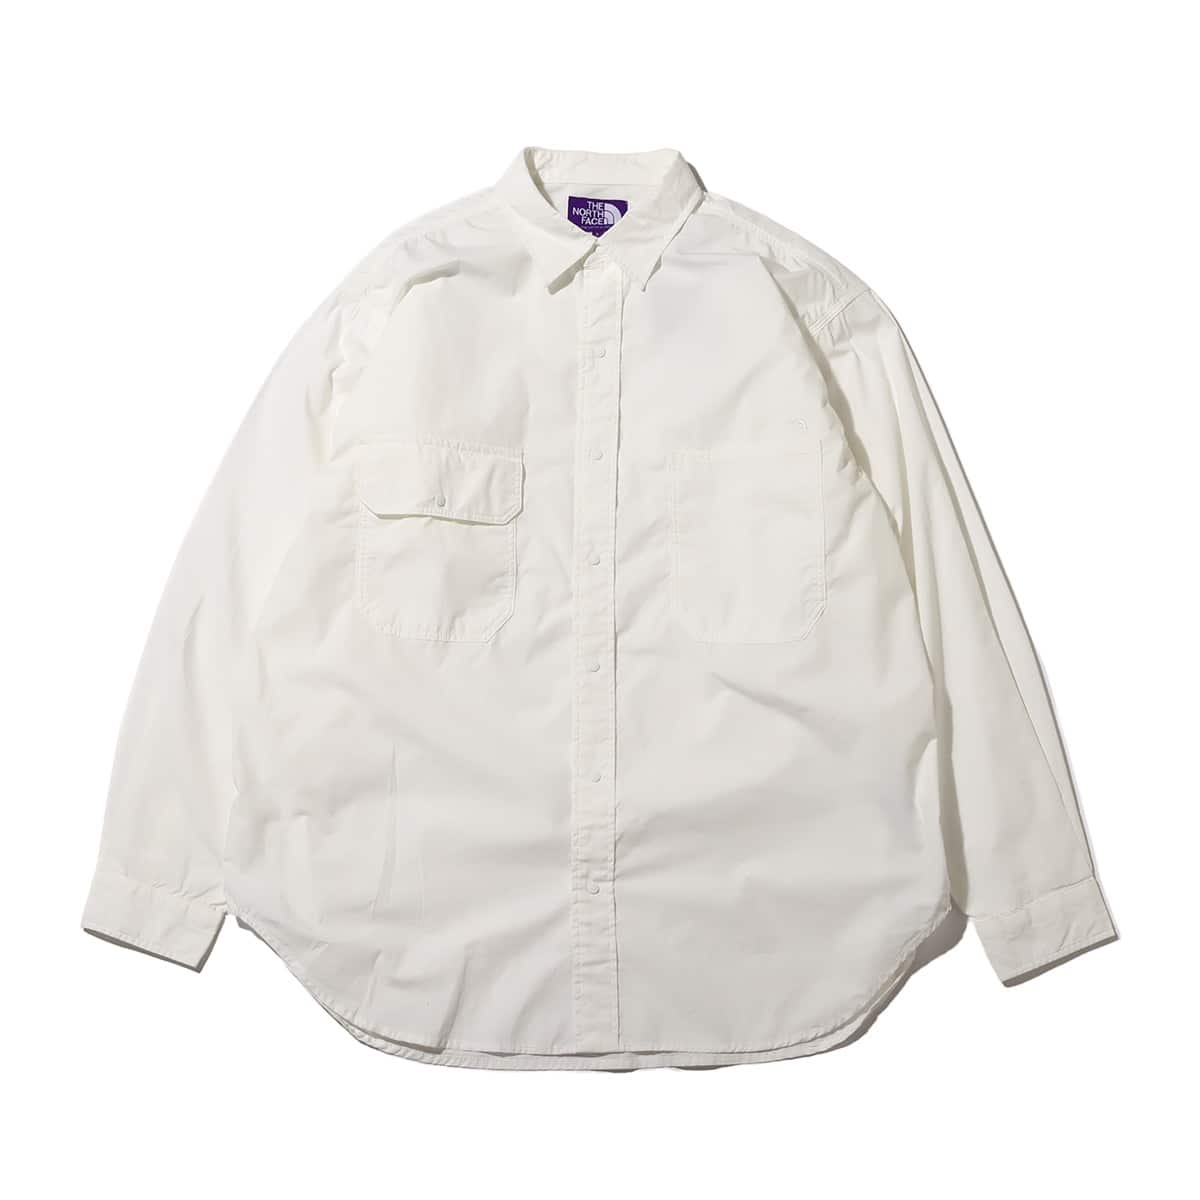 THE NORTH FACE PURPLE LABEL Field Typewriter Shirt White 23SS-I